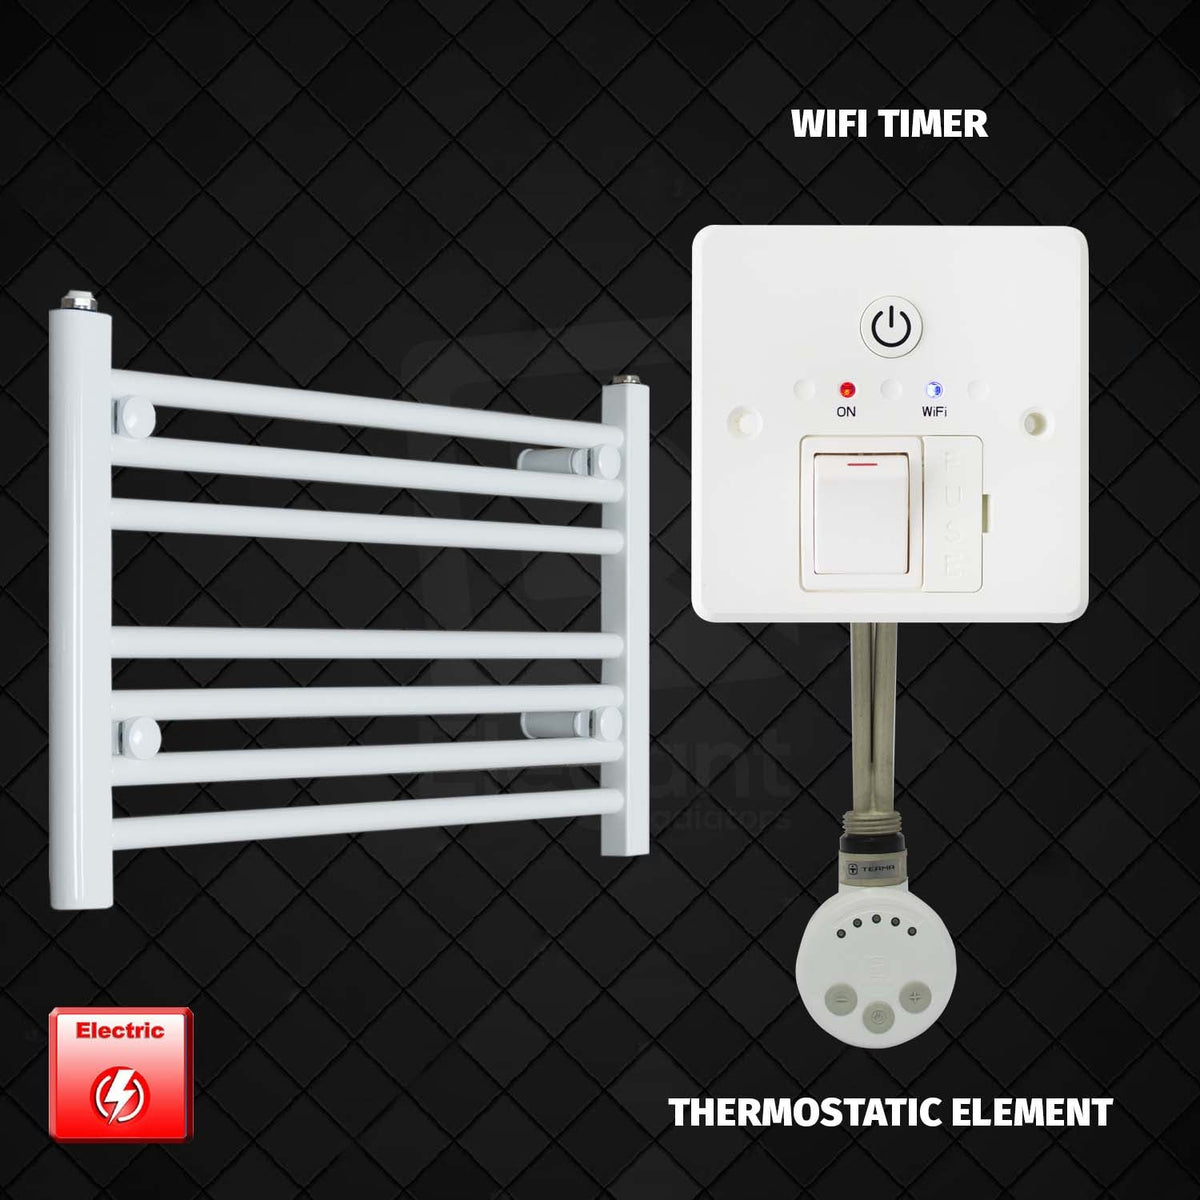 400 x 600 Pre-Filled Electric Heated Towel Radiator White HTR MOA Thermostatic Element Wifi Timer